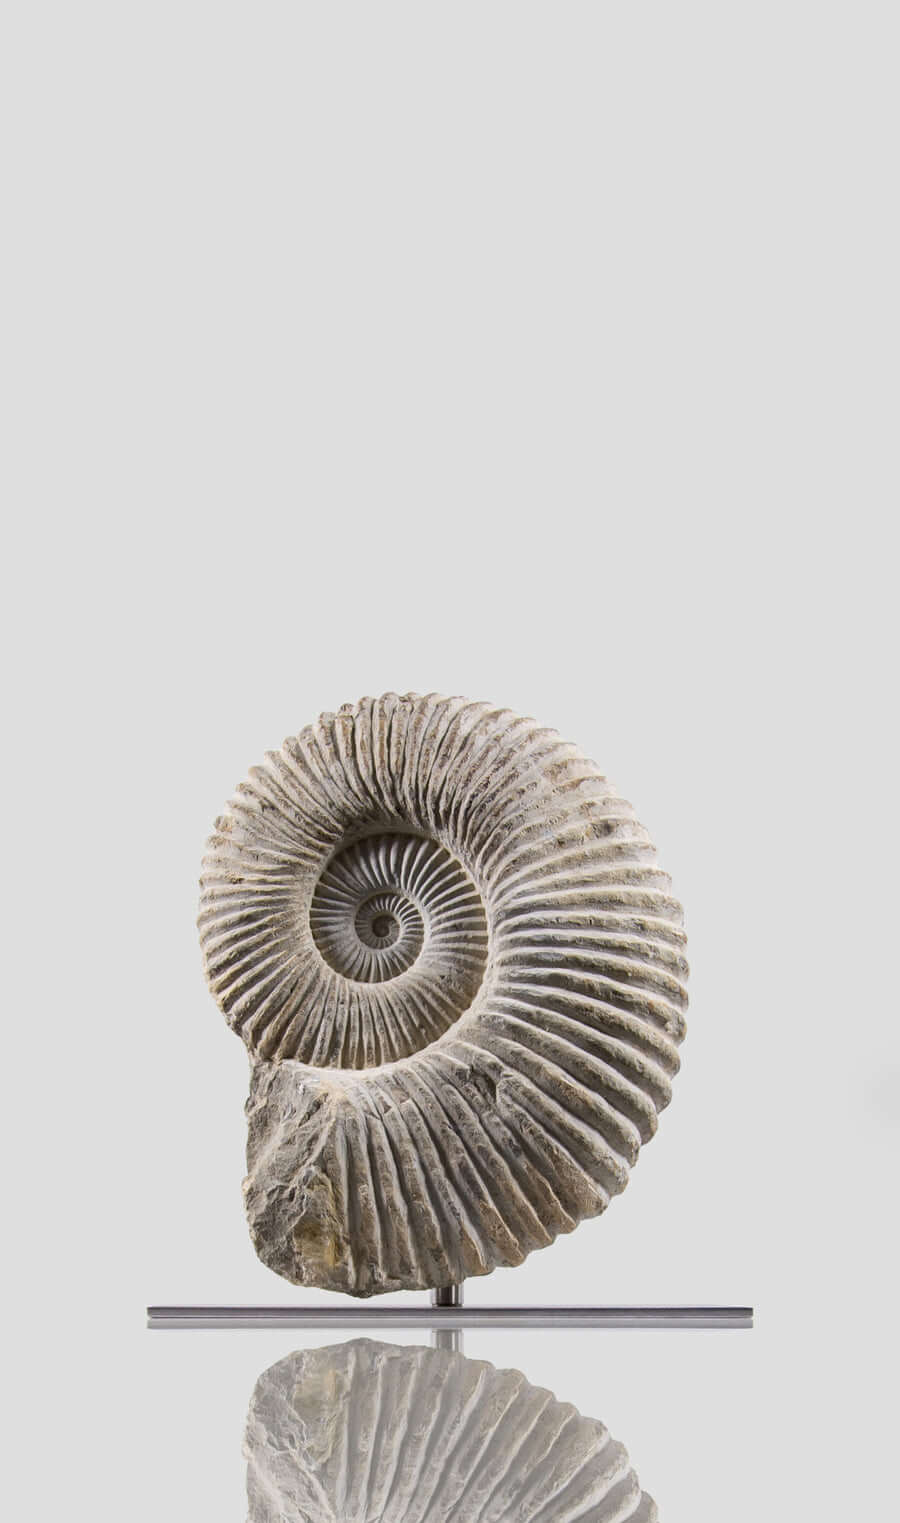 A stunning mantelliceras ammonite for sale as an ammonite on stand for sale